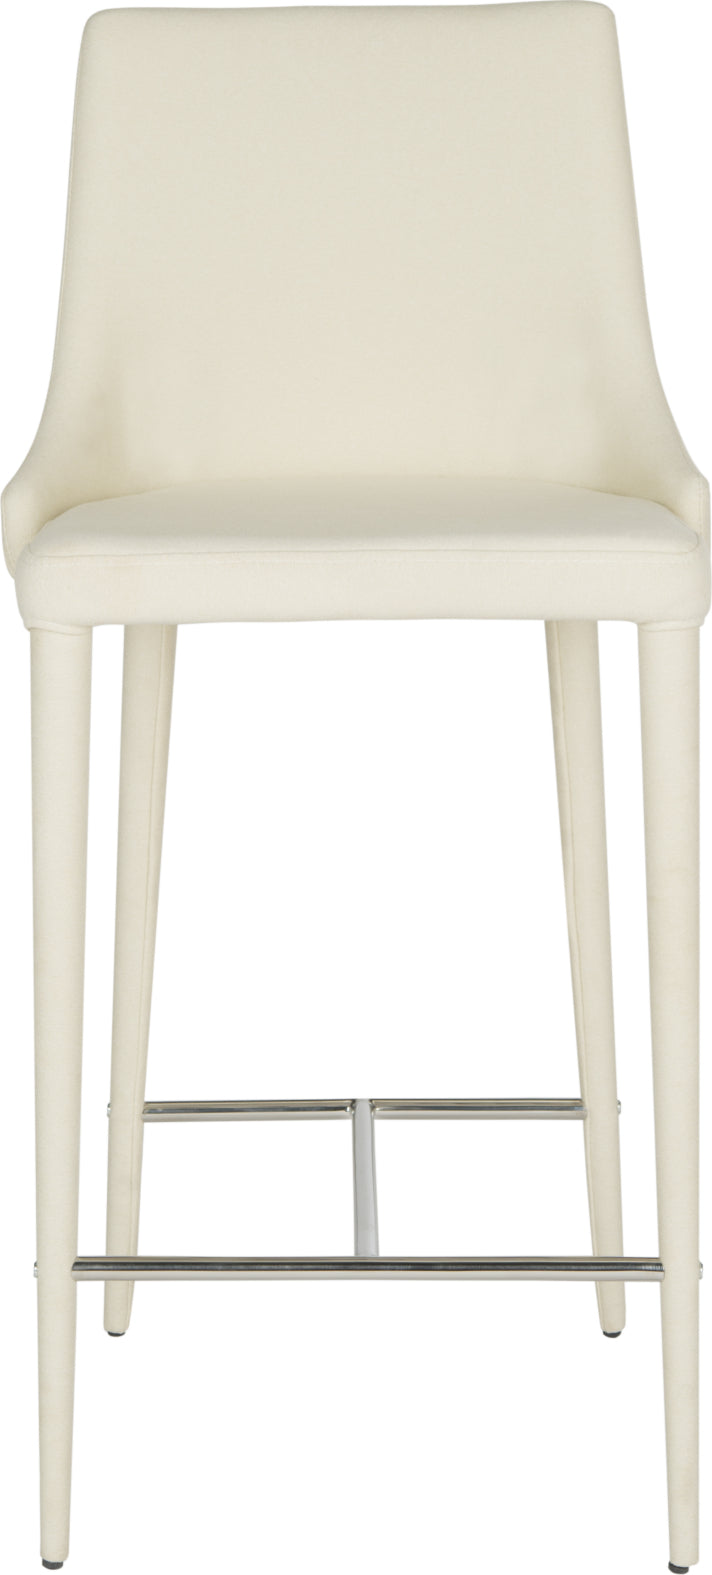 Safavieh Summerset Counter Stool Beige and Chrome Furniture main image